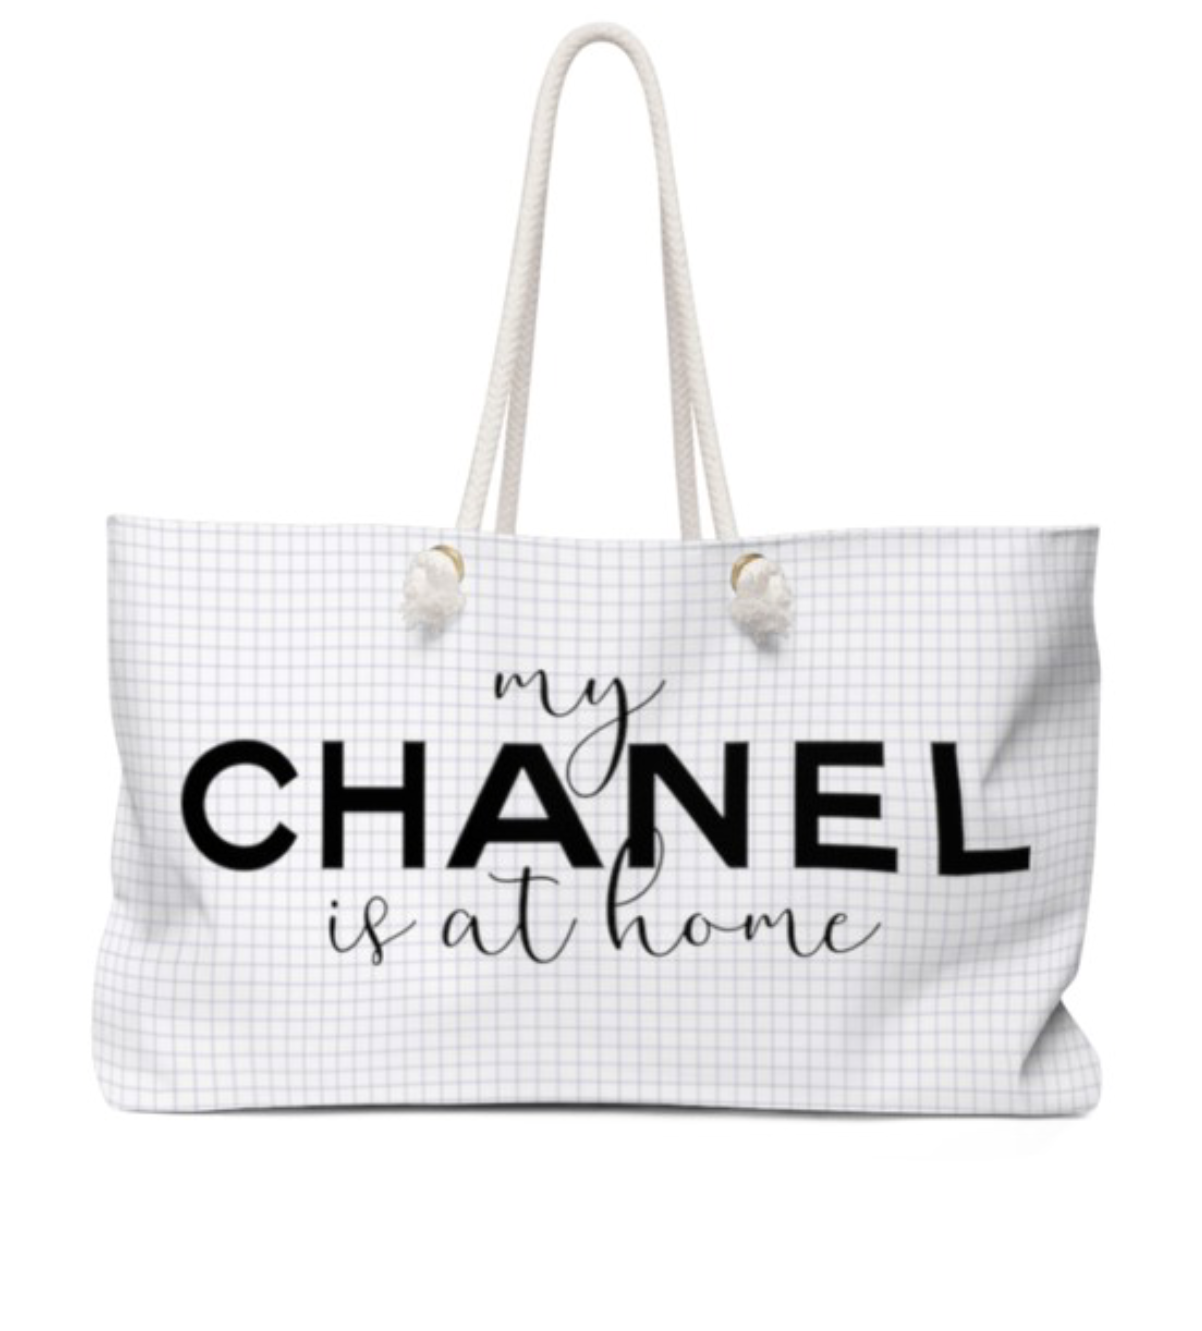 Saco Tote Bag My Chanel is at Home Glitter